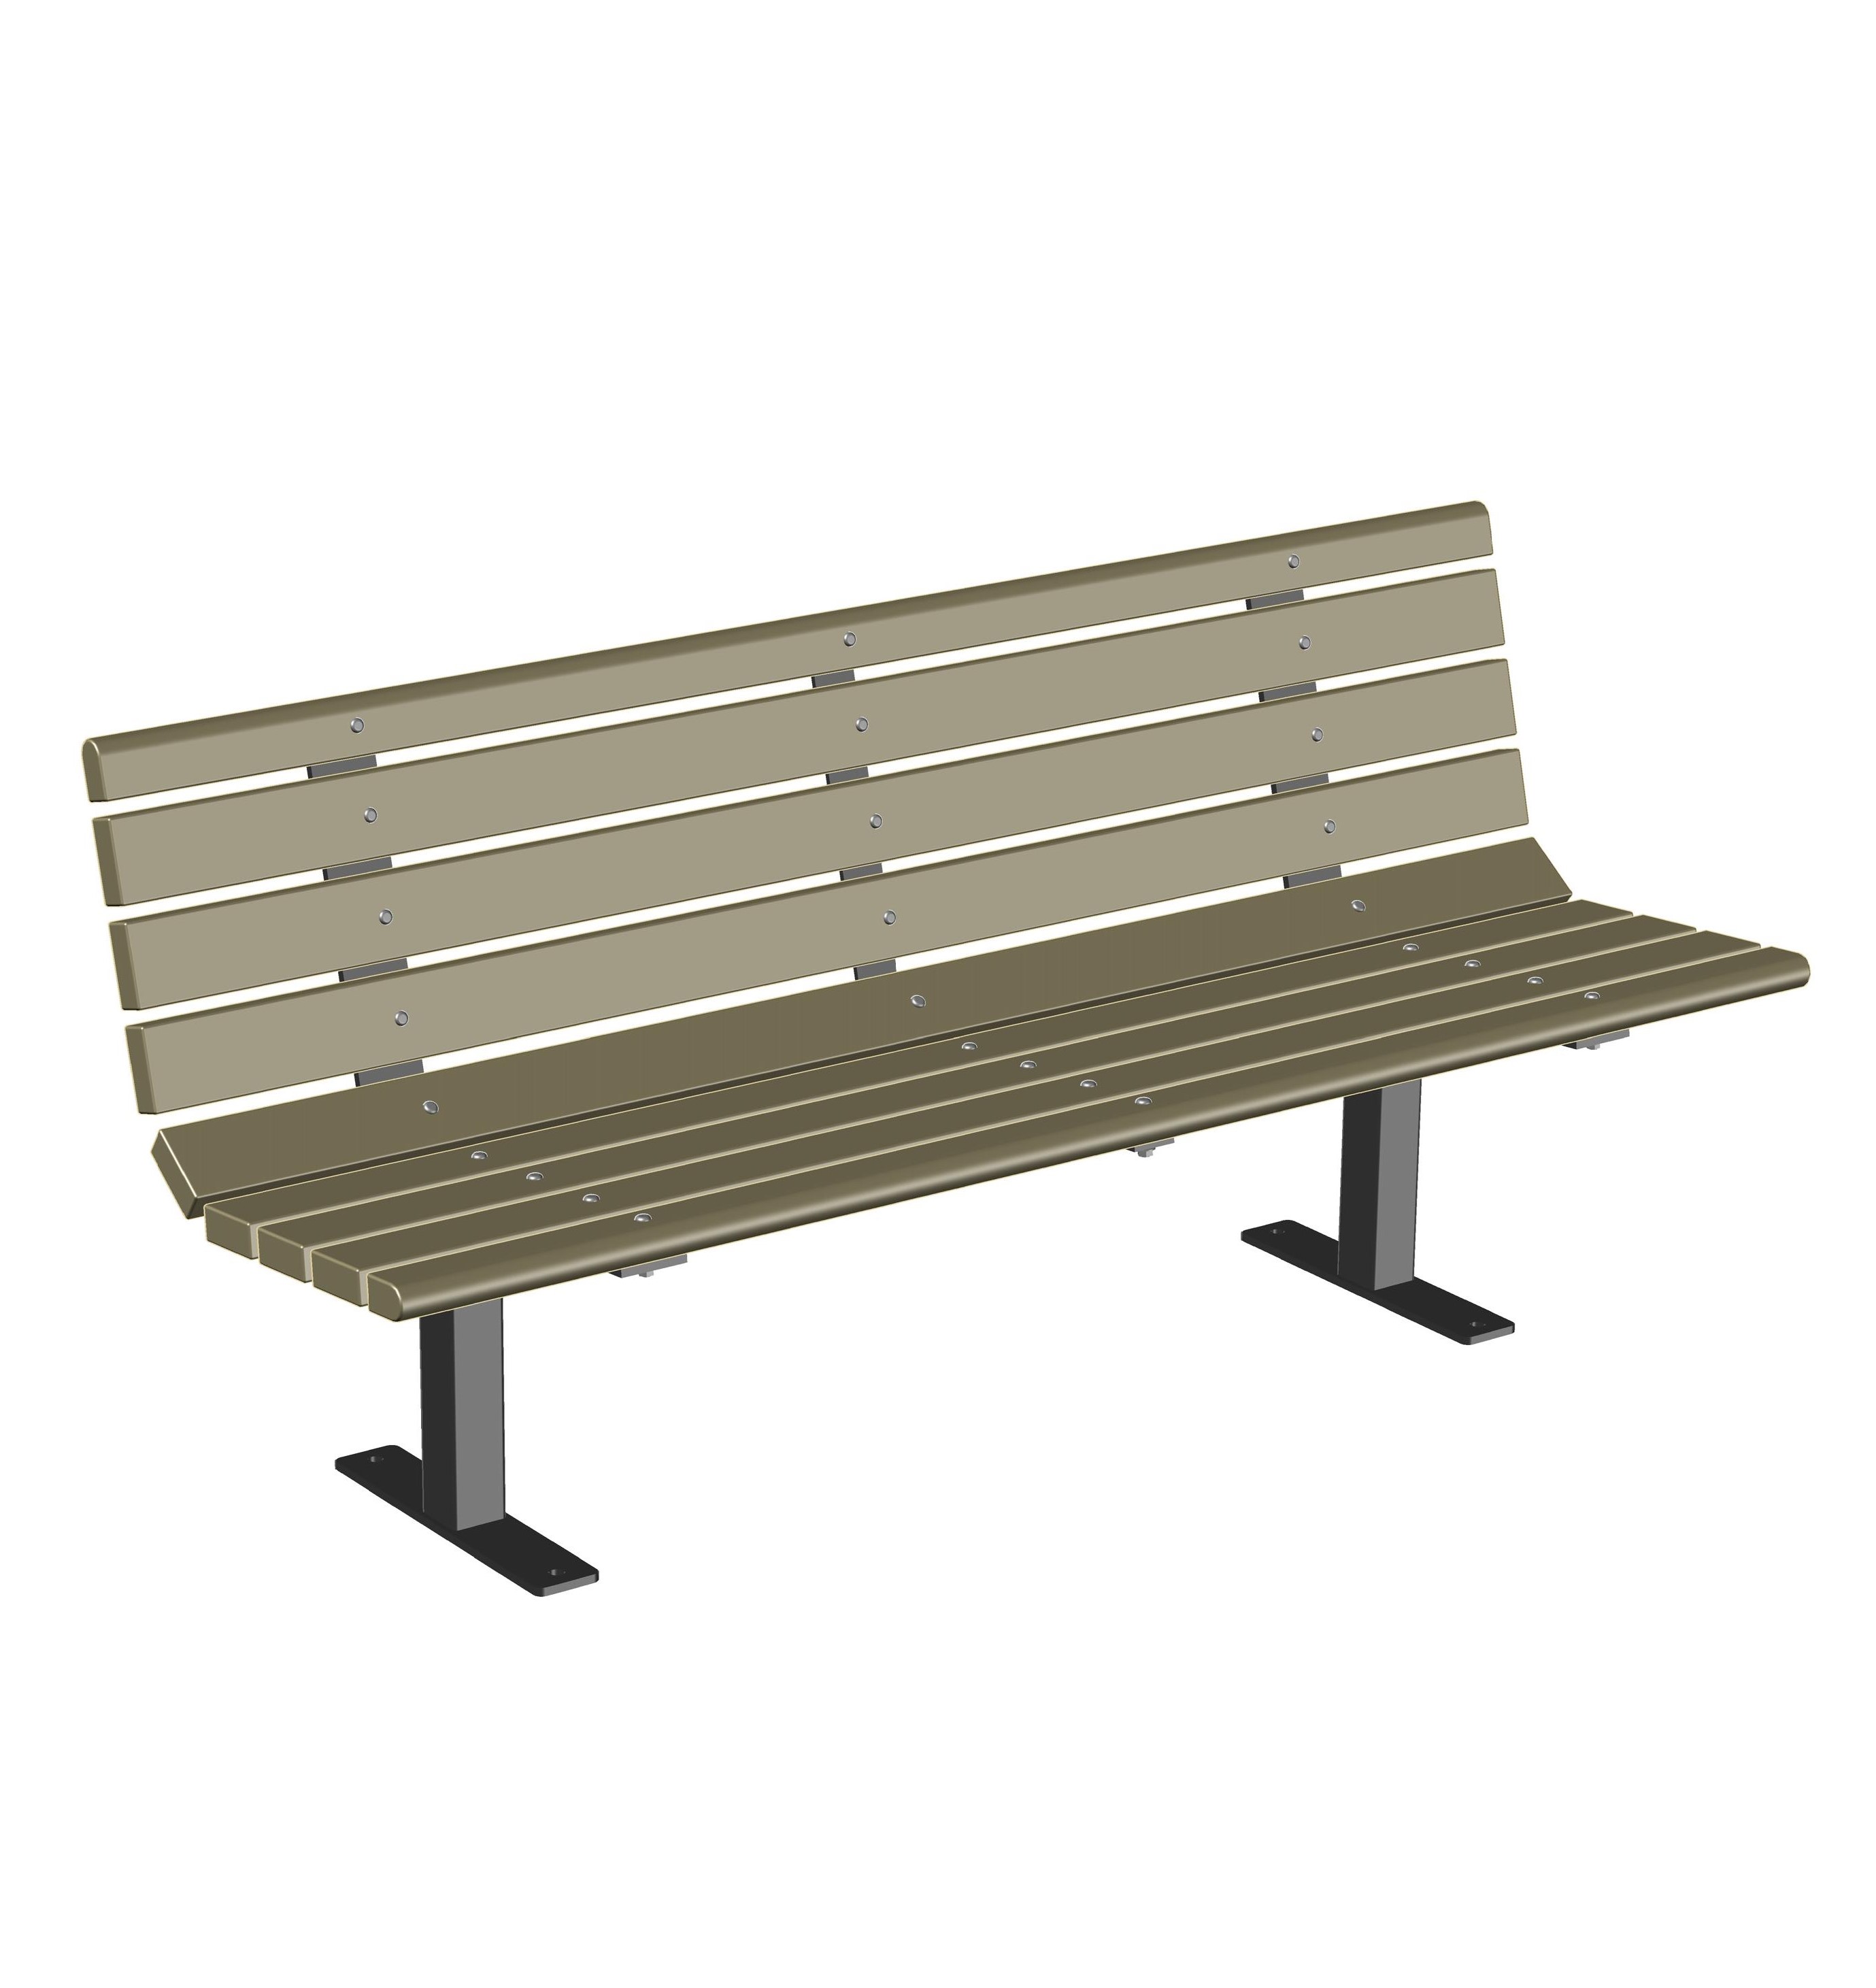 CAD Drawings Knill Site Furnishings (552-6-SSA) Wood Bench, 6', with Arms, 2x4 Wood Planks, Surface Mount 